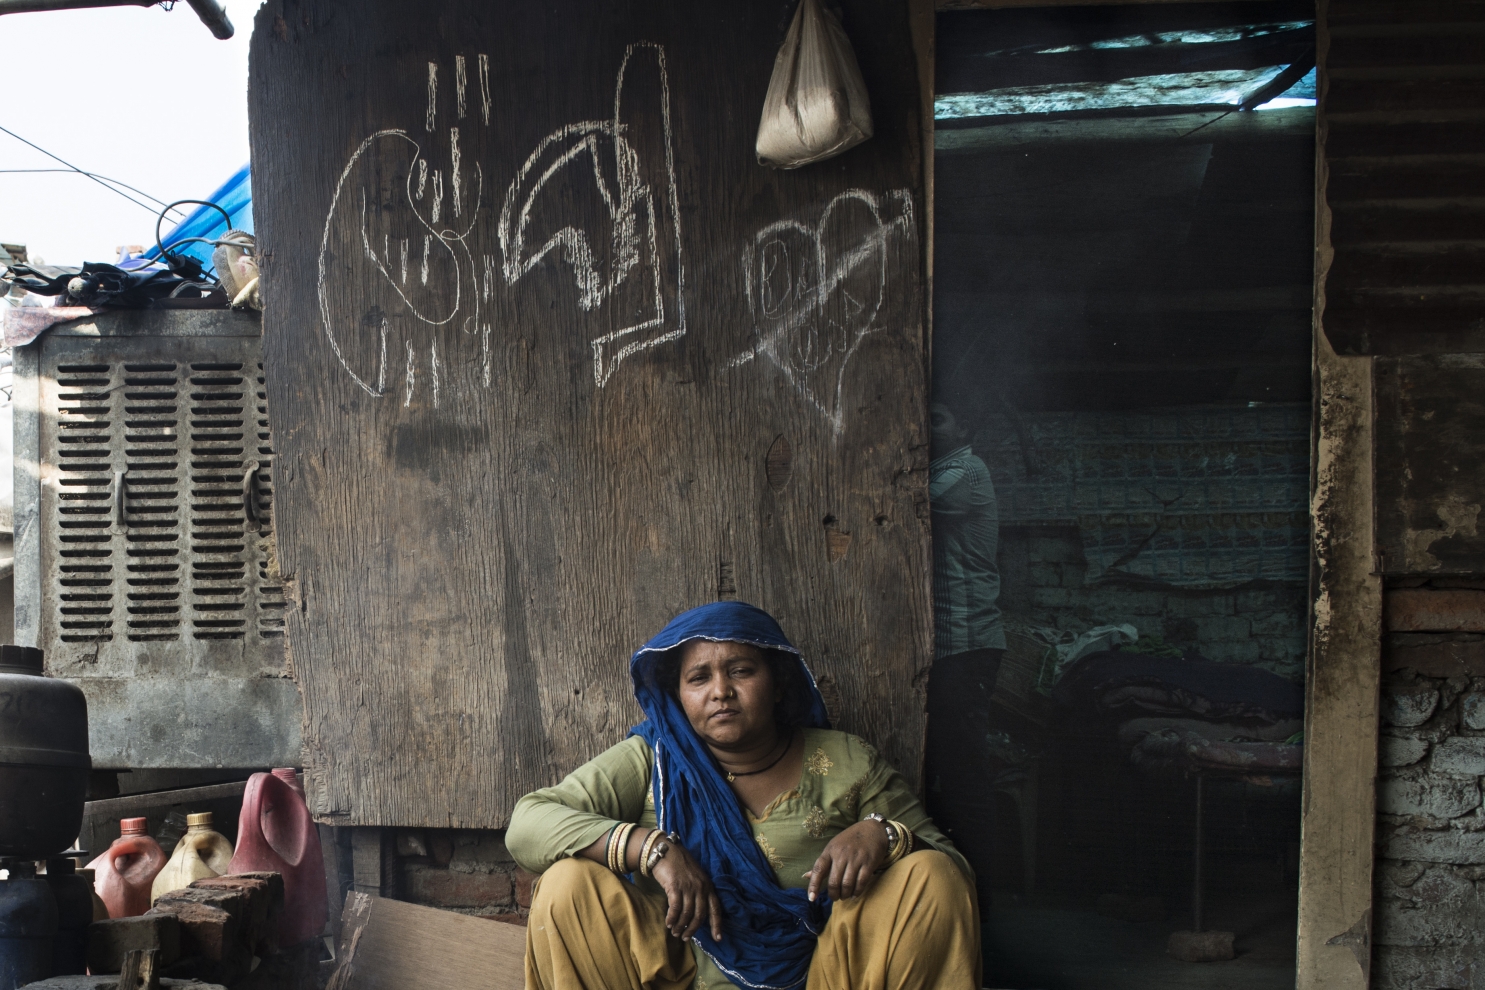 Geetha (35), a mother of 2 children, used to work as an iron carver before her community was forced to leave their settlement in 2009. Now she is working as a maid in nearby houses. 